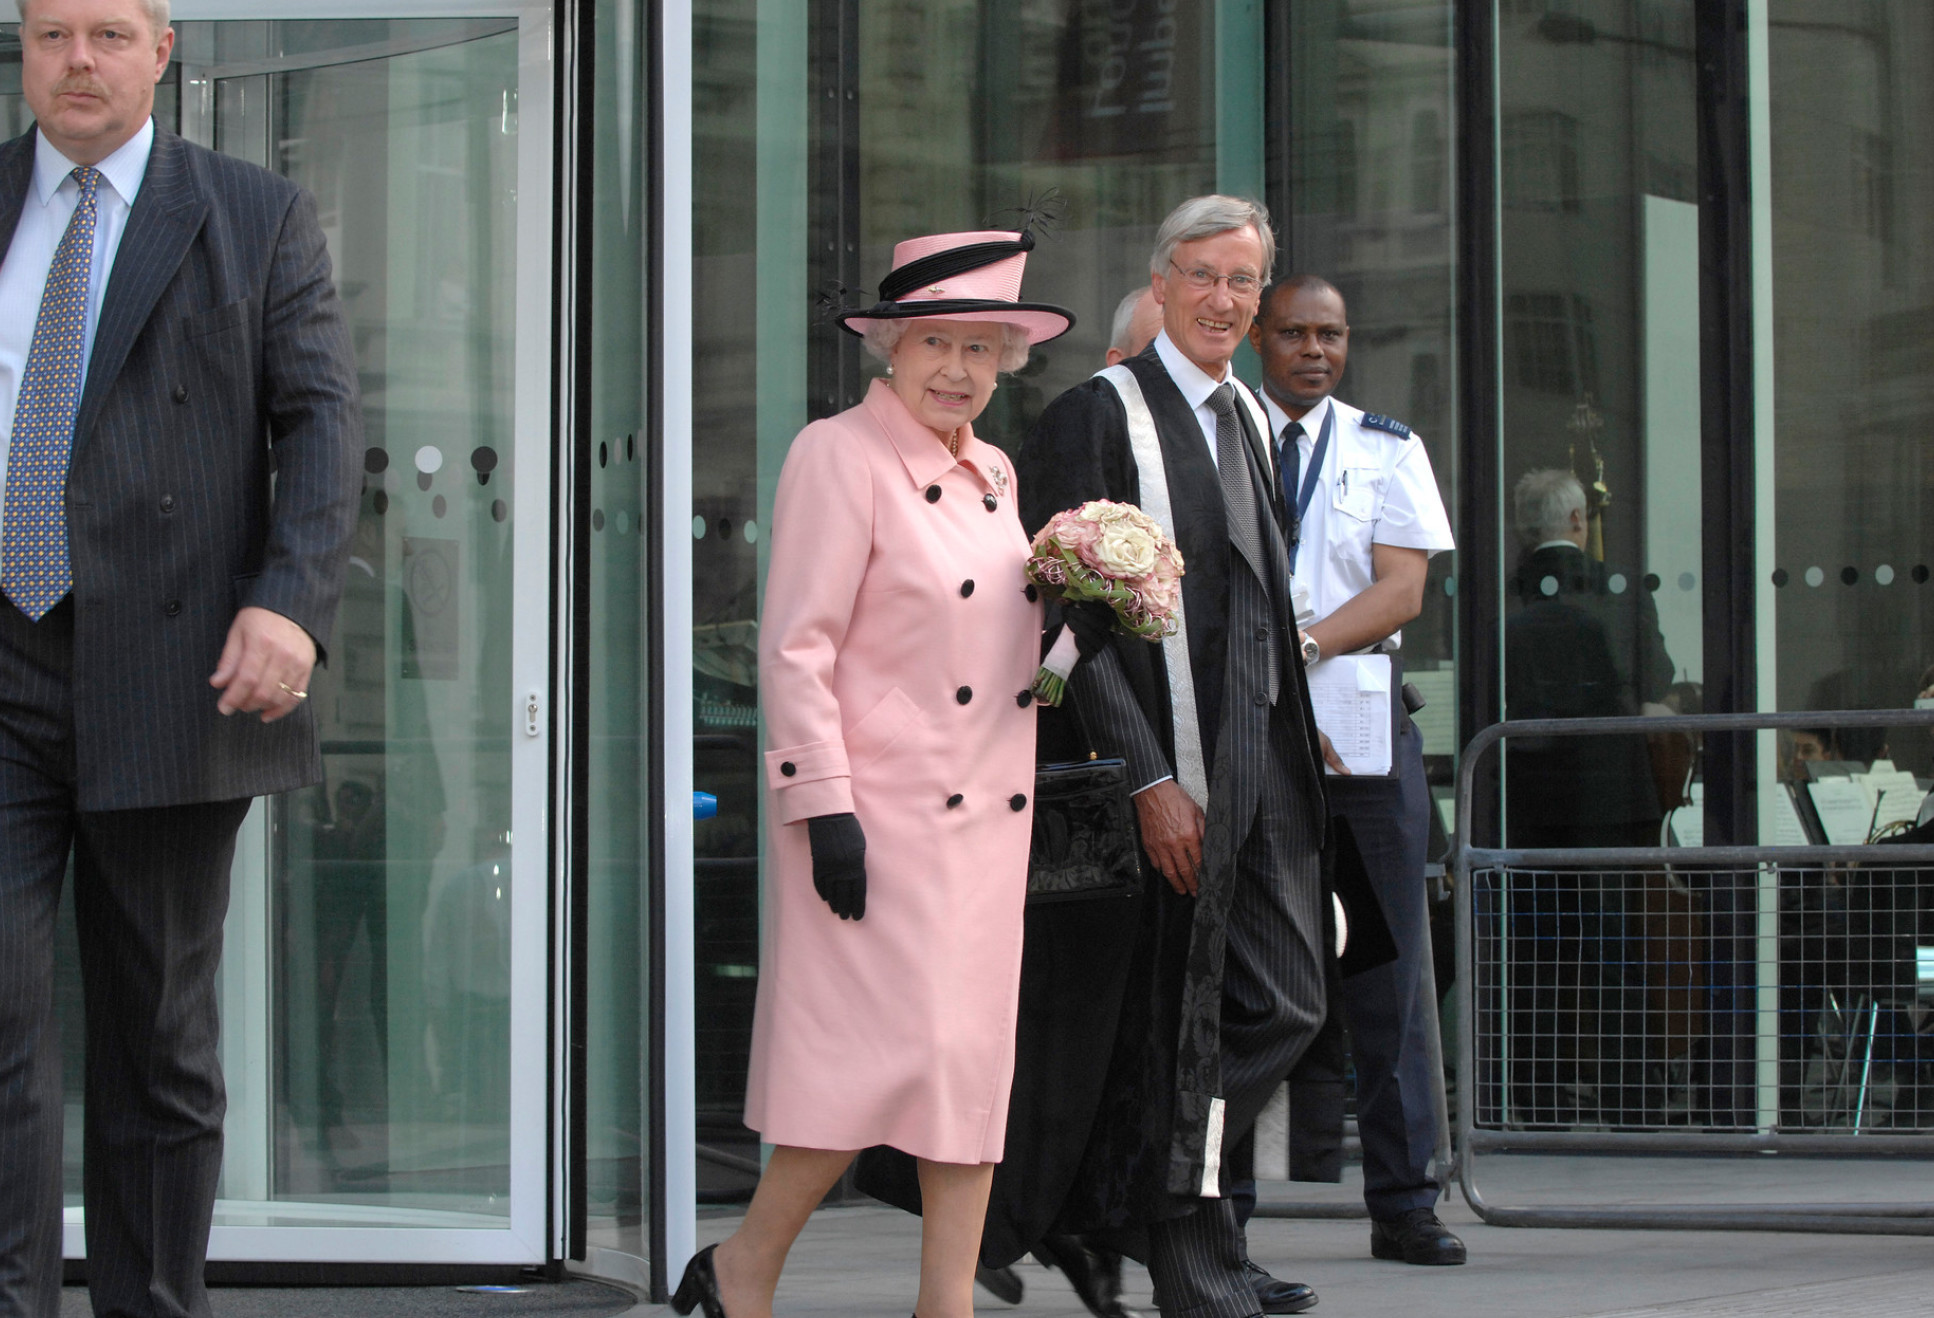 Royal visit 2007 - Queen and Richard Sykes